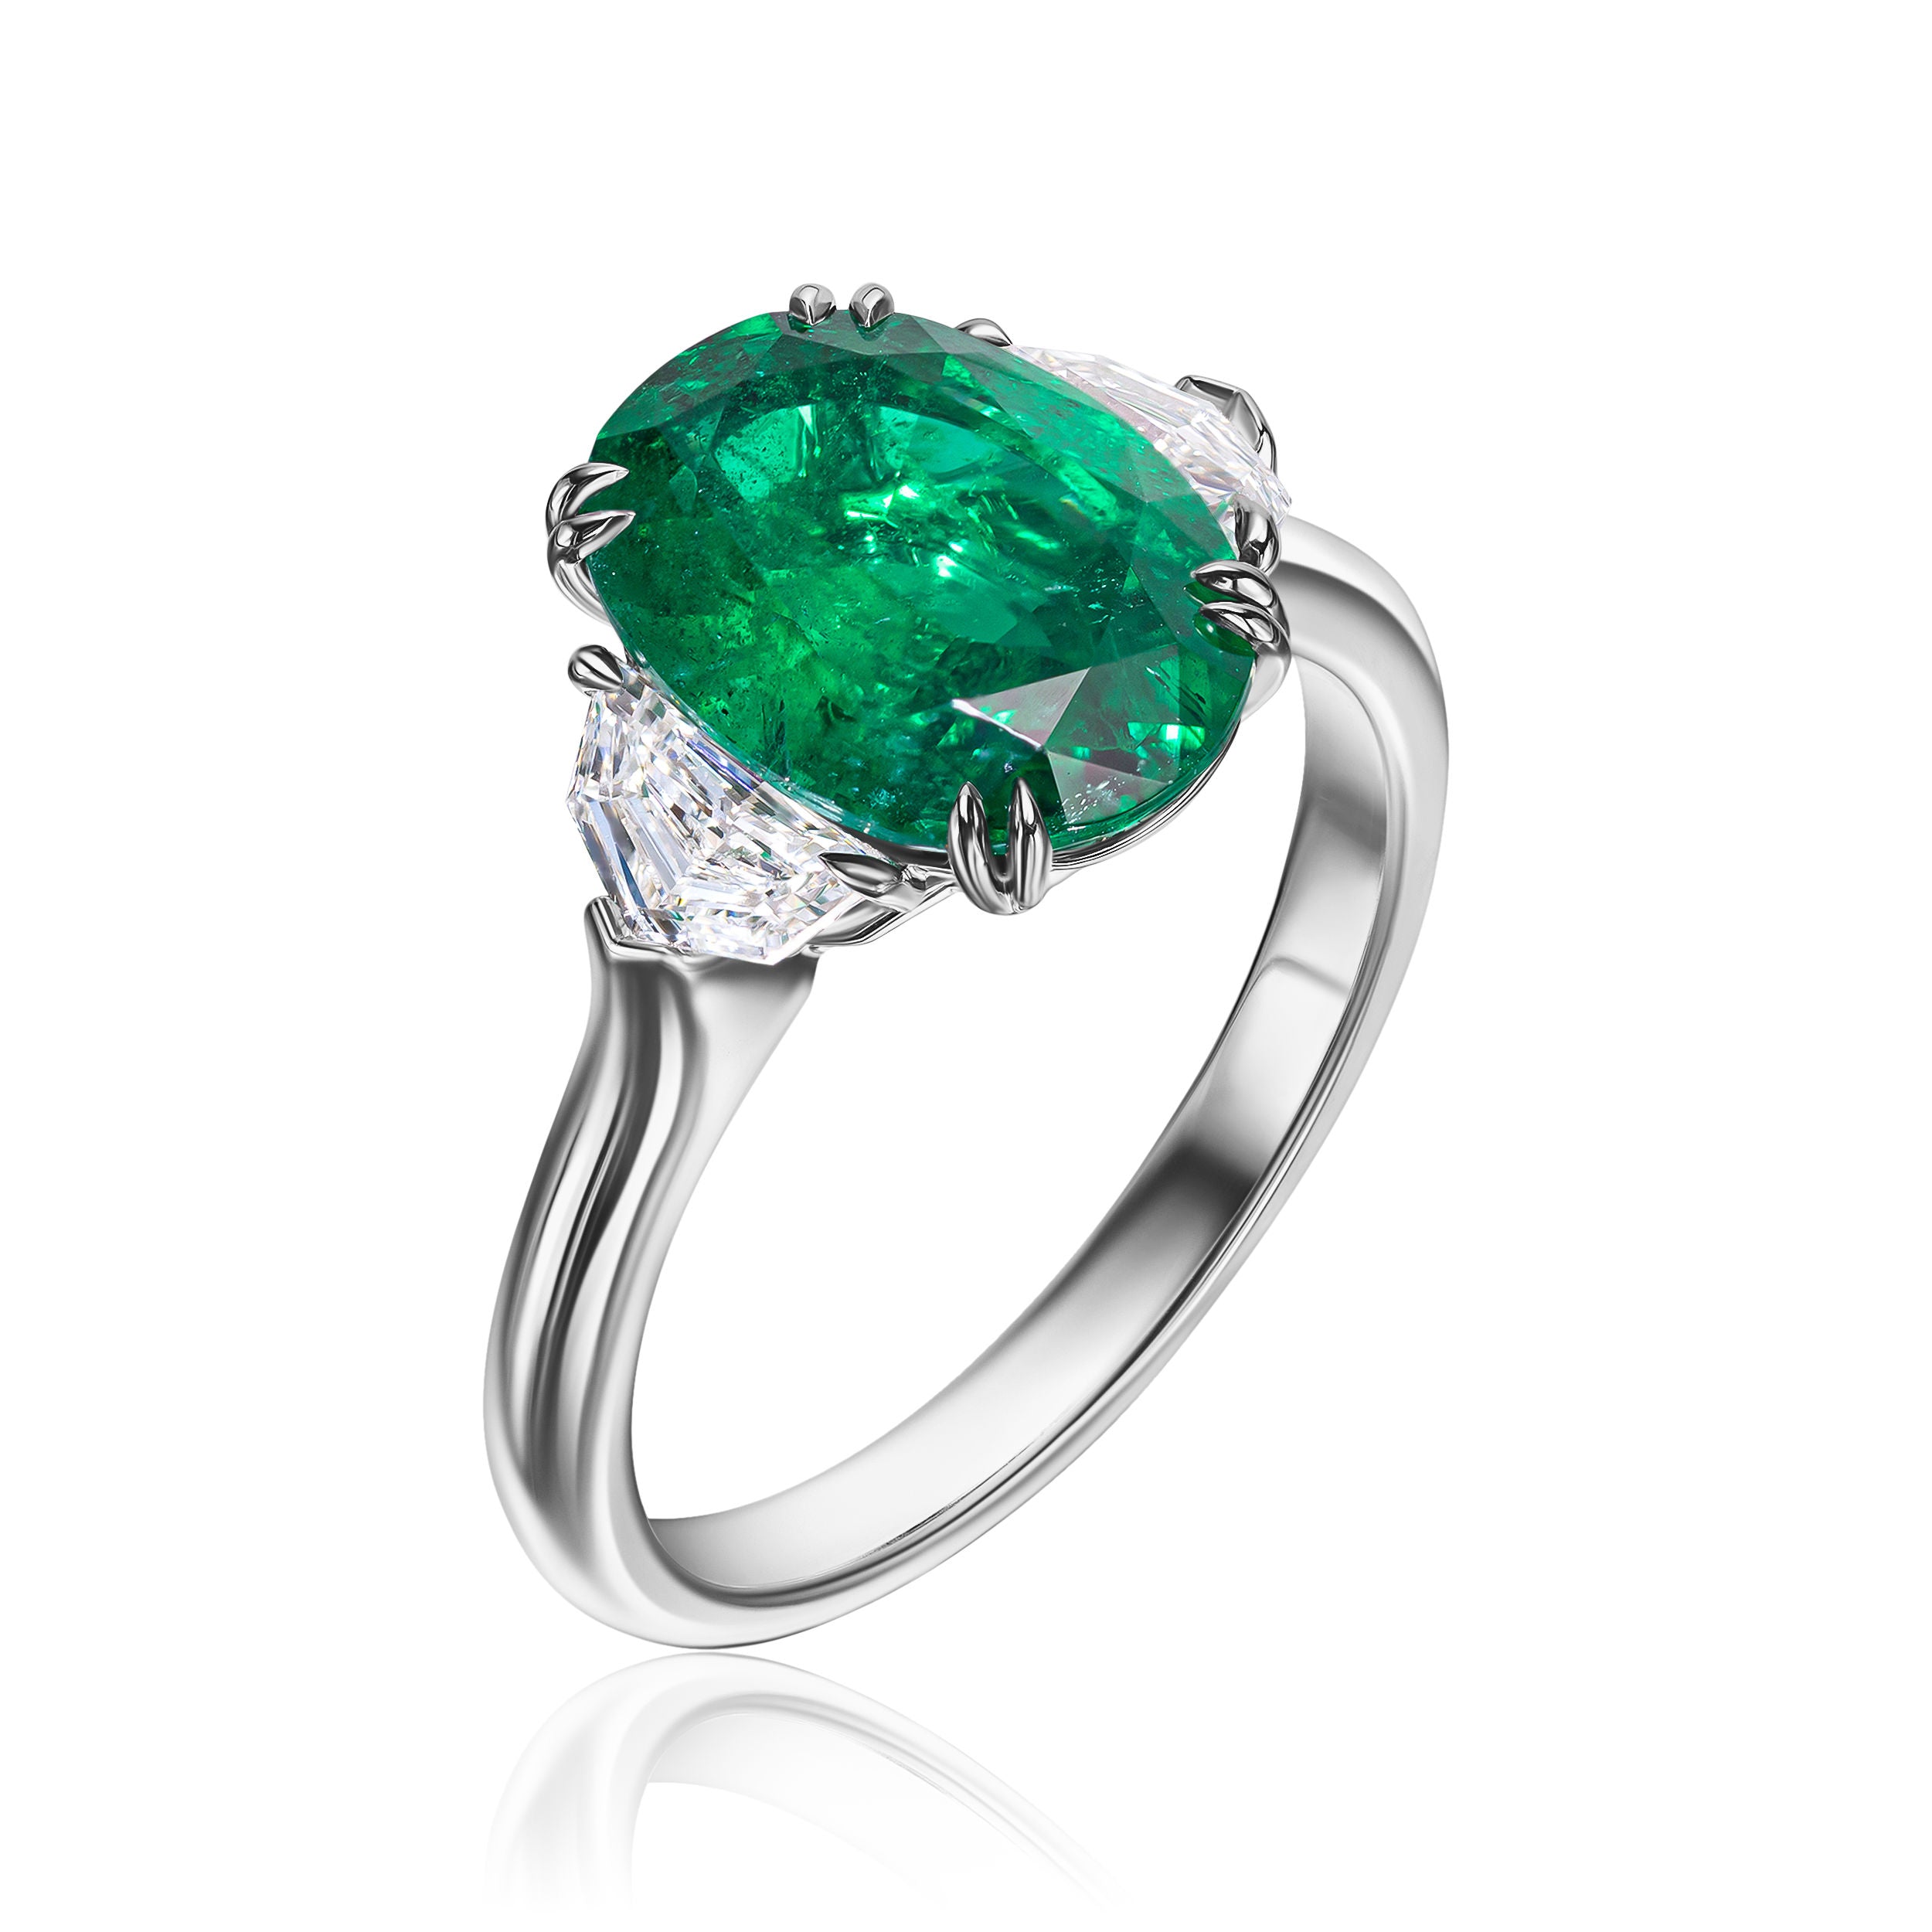 Oval Emerald Ring with Cadillac Shapes - 3.94ct TW